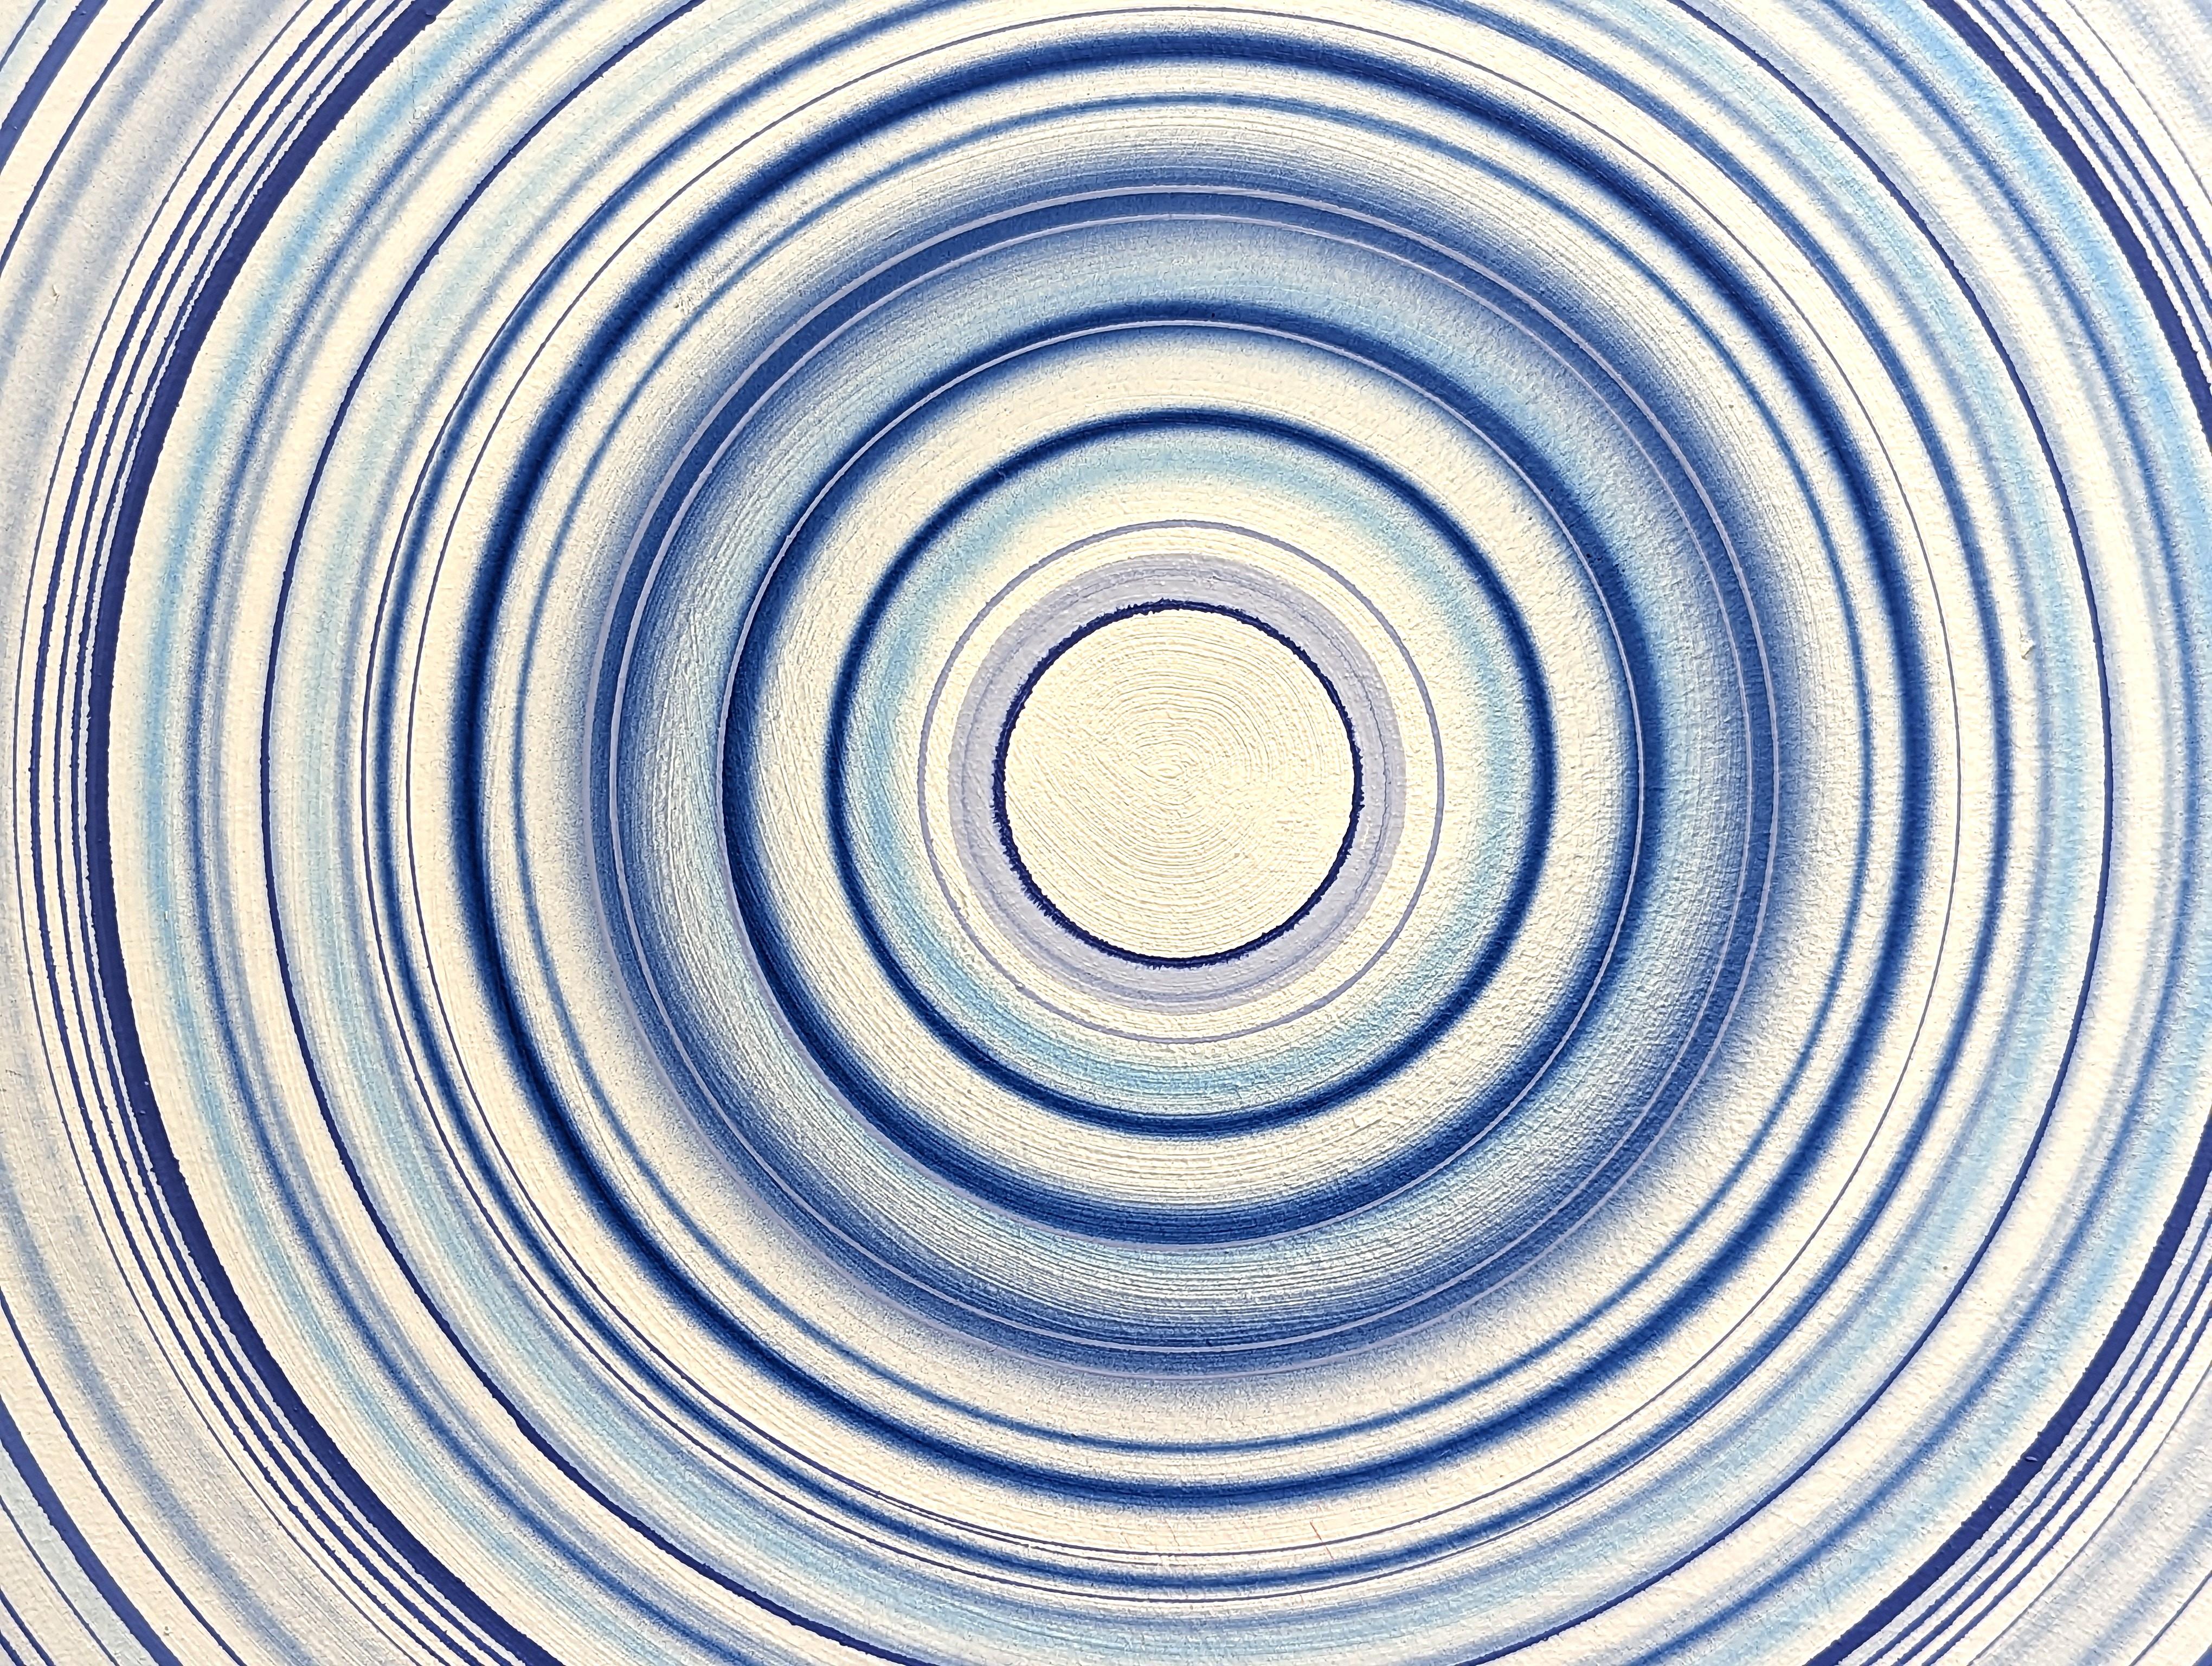 Blue and white abstract contemporary circular painting by Houston, TX artist David Hardaker. Signed, titled, and dated by the artist on the reverse. 

Artist Statement: The work is a response to music.

The application of texture and the act of